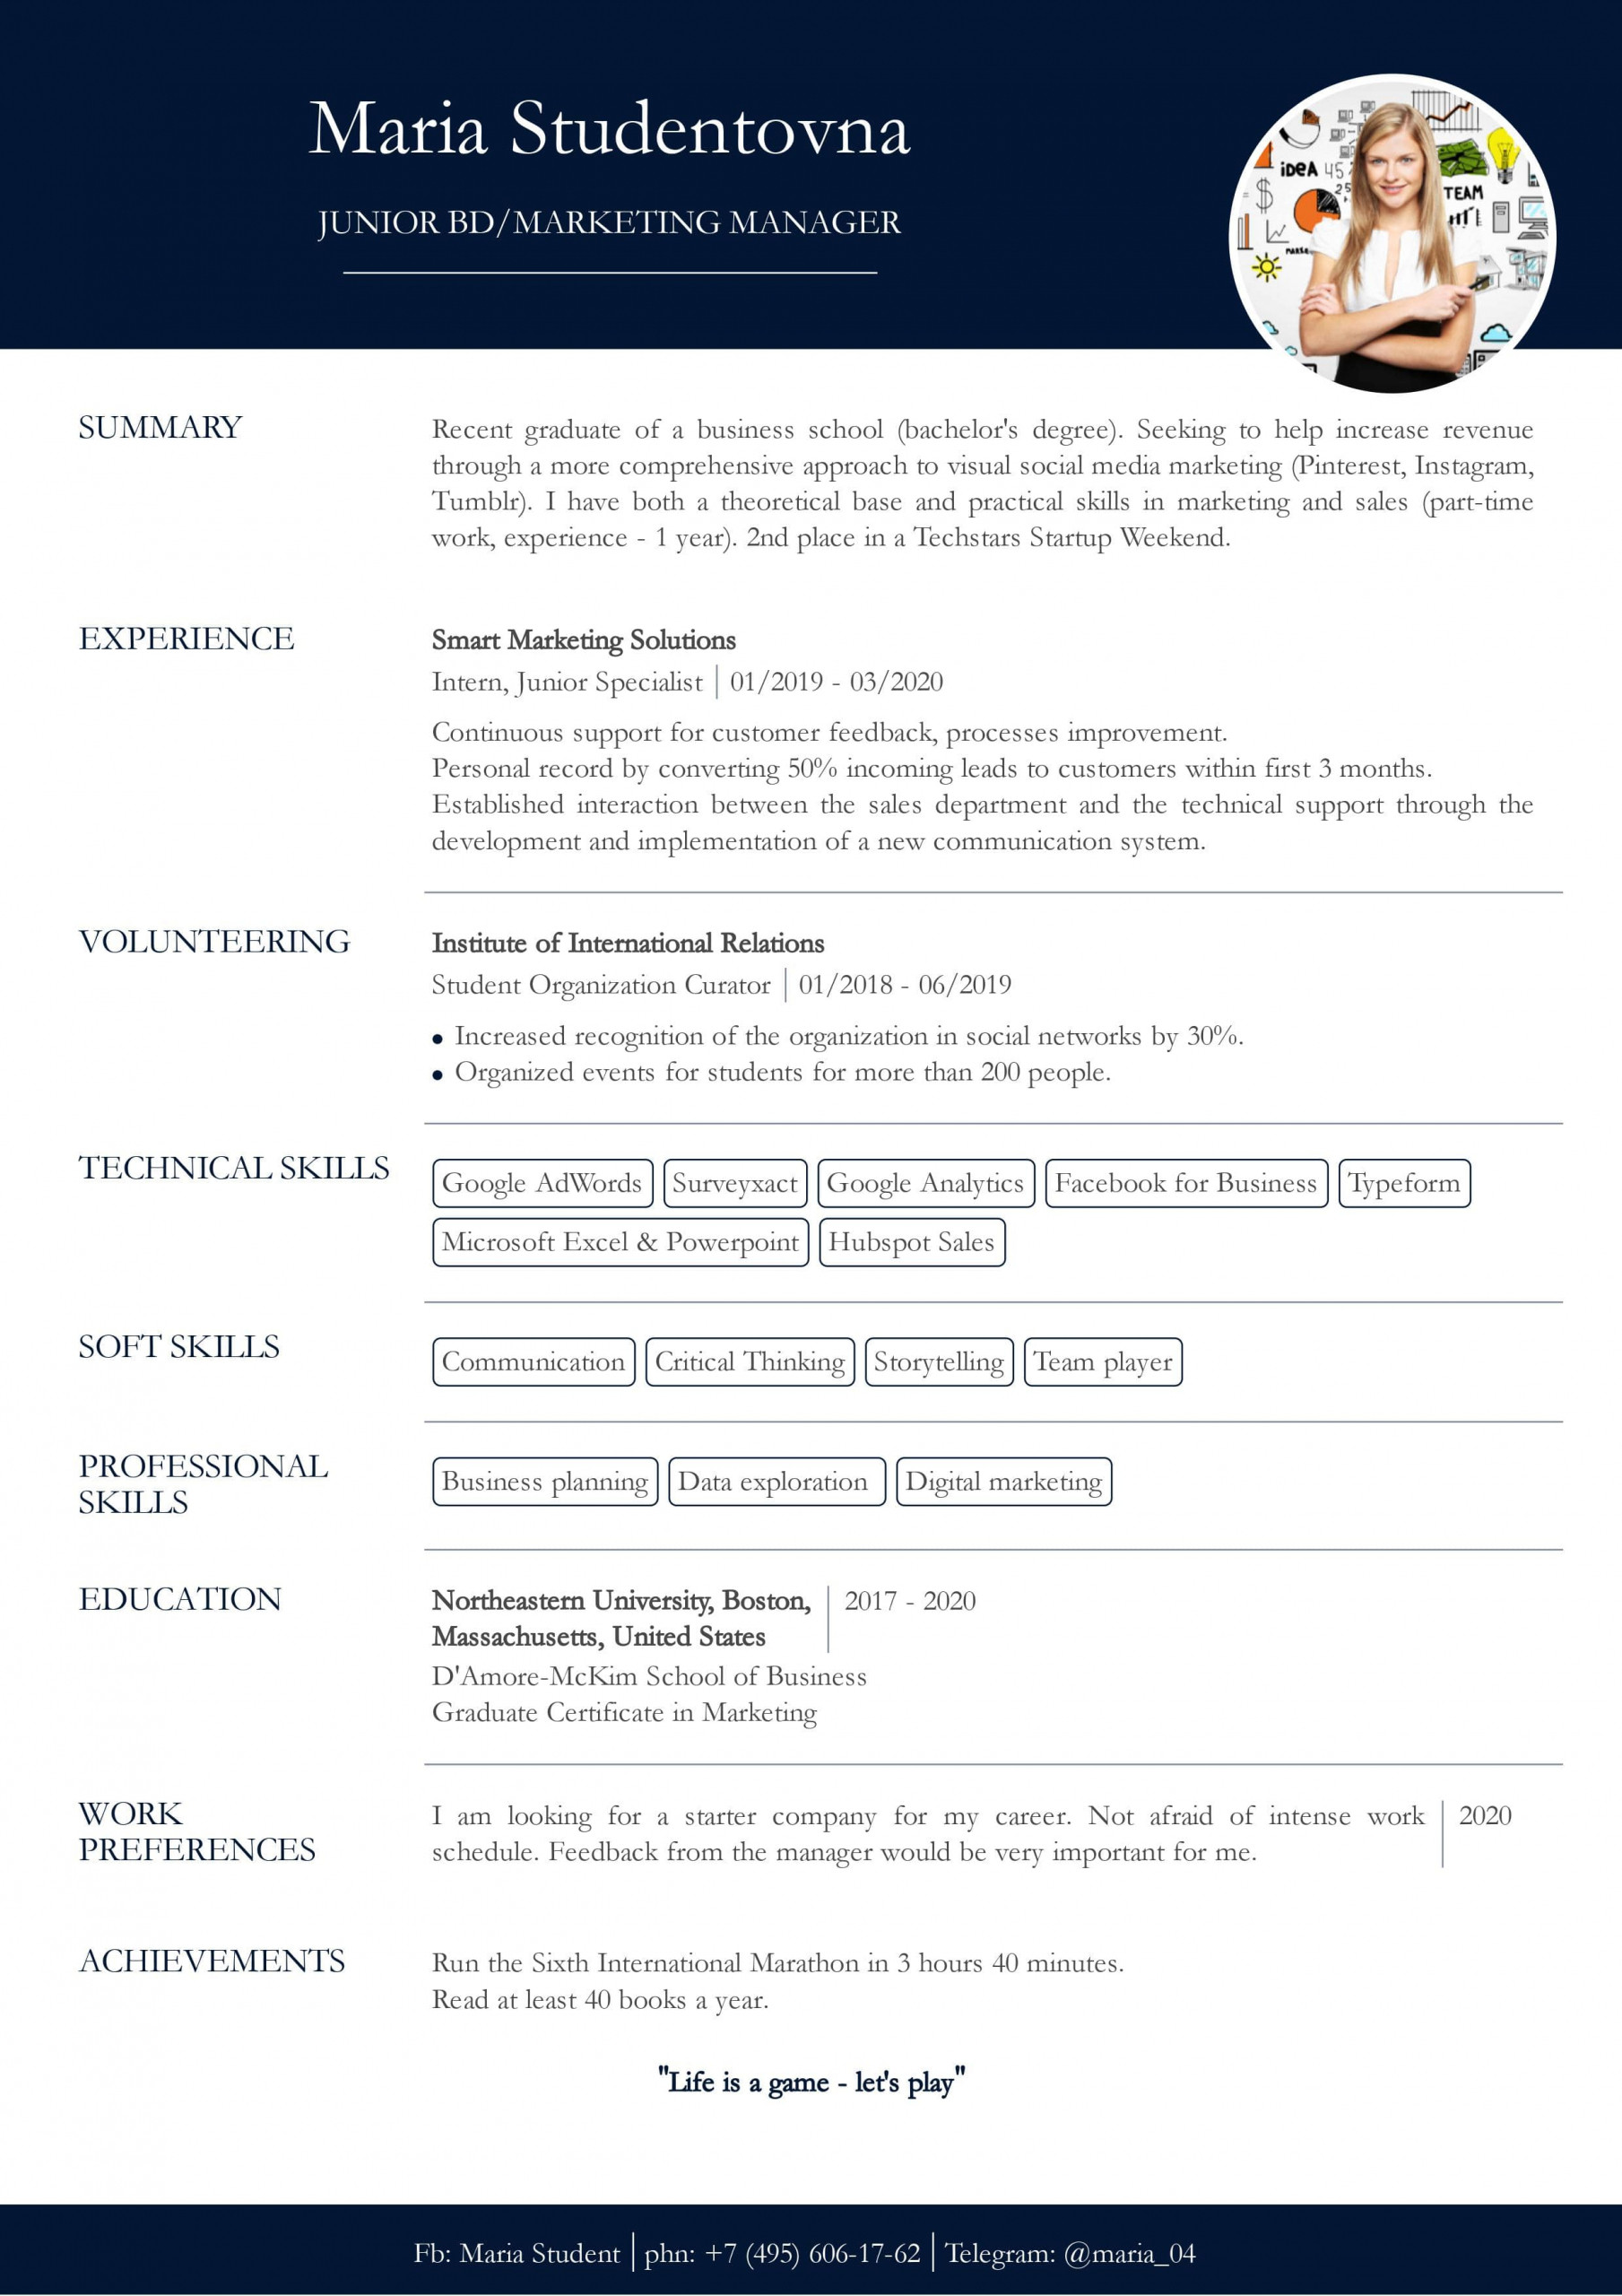 Sample Resume with No Prior Work Experience Resume with No Work Experience. Sample for Students. – Cv2you Blog